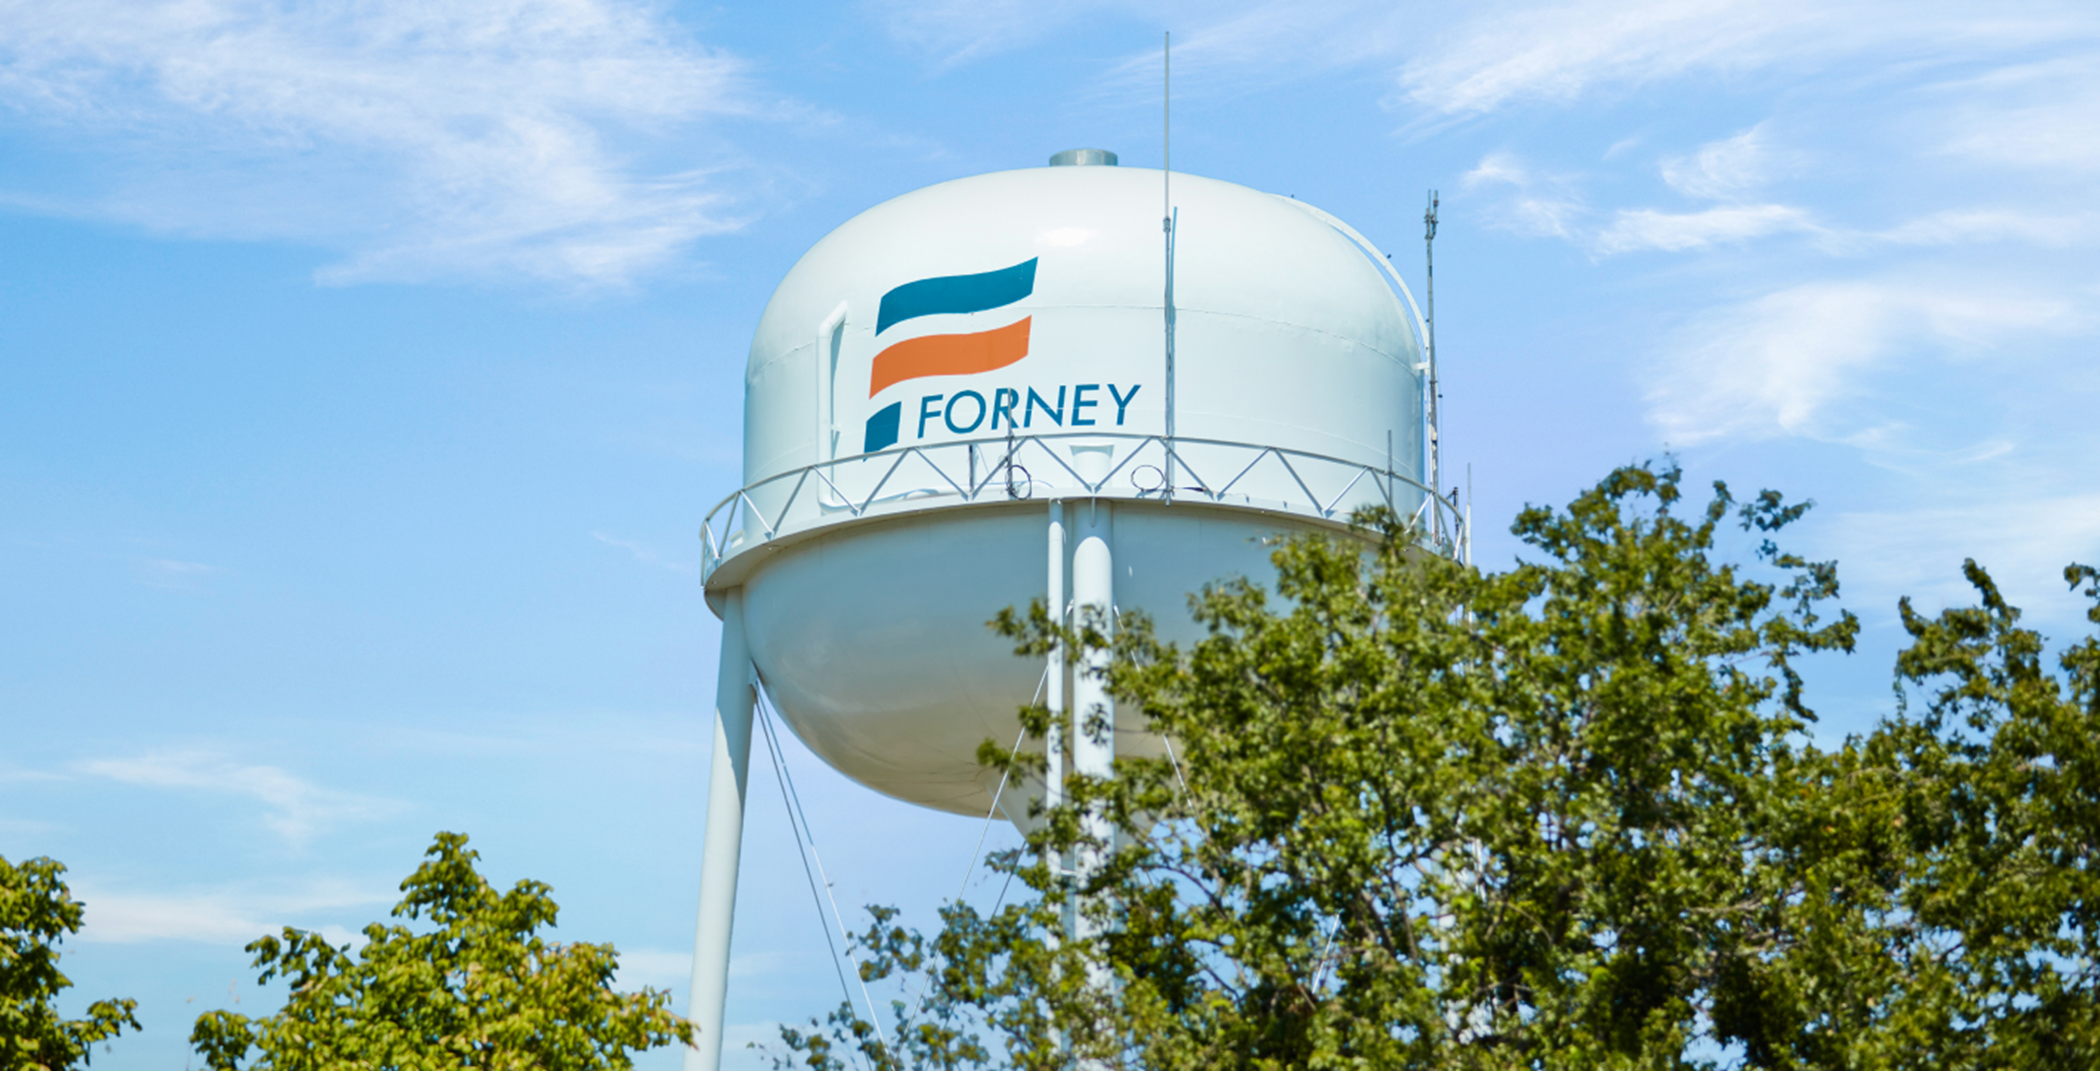 Watertower in Forney, TX